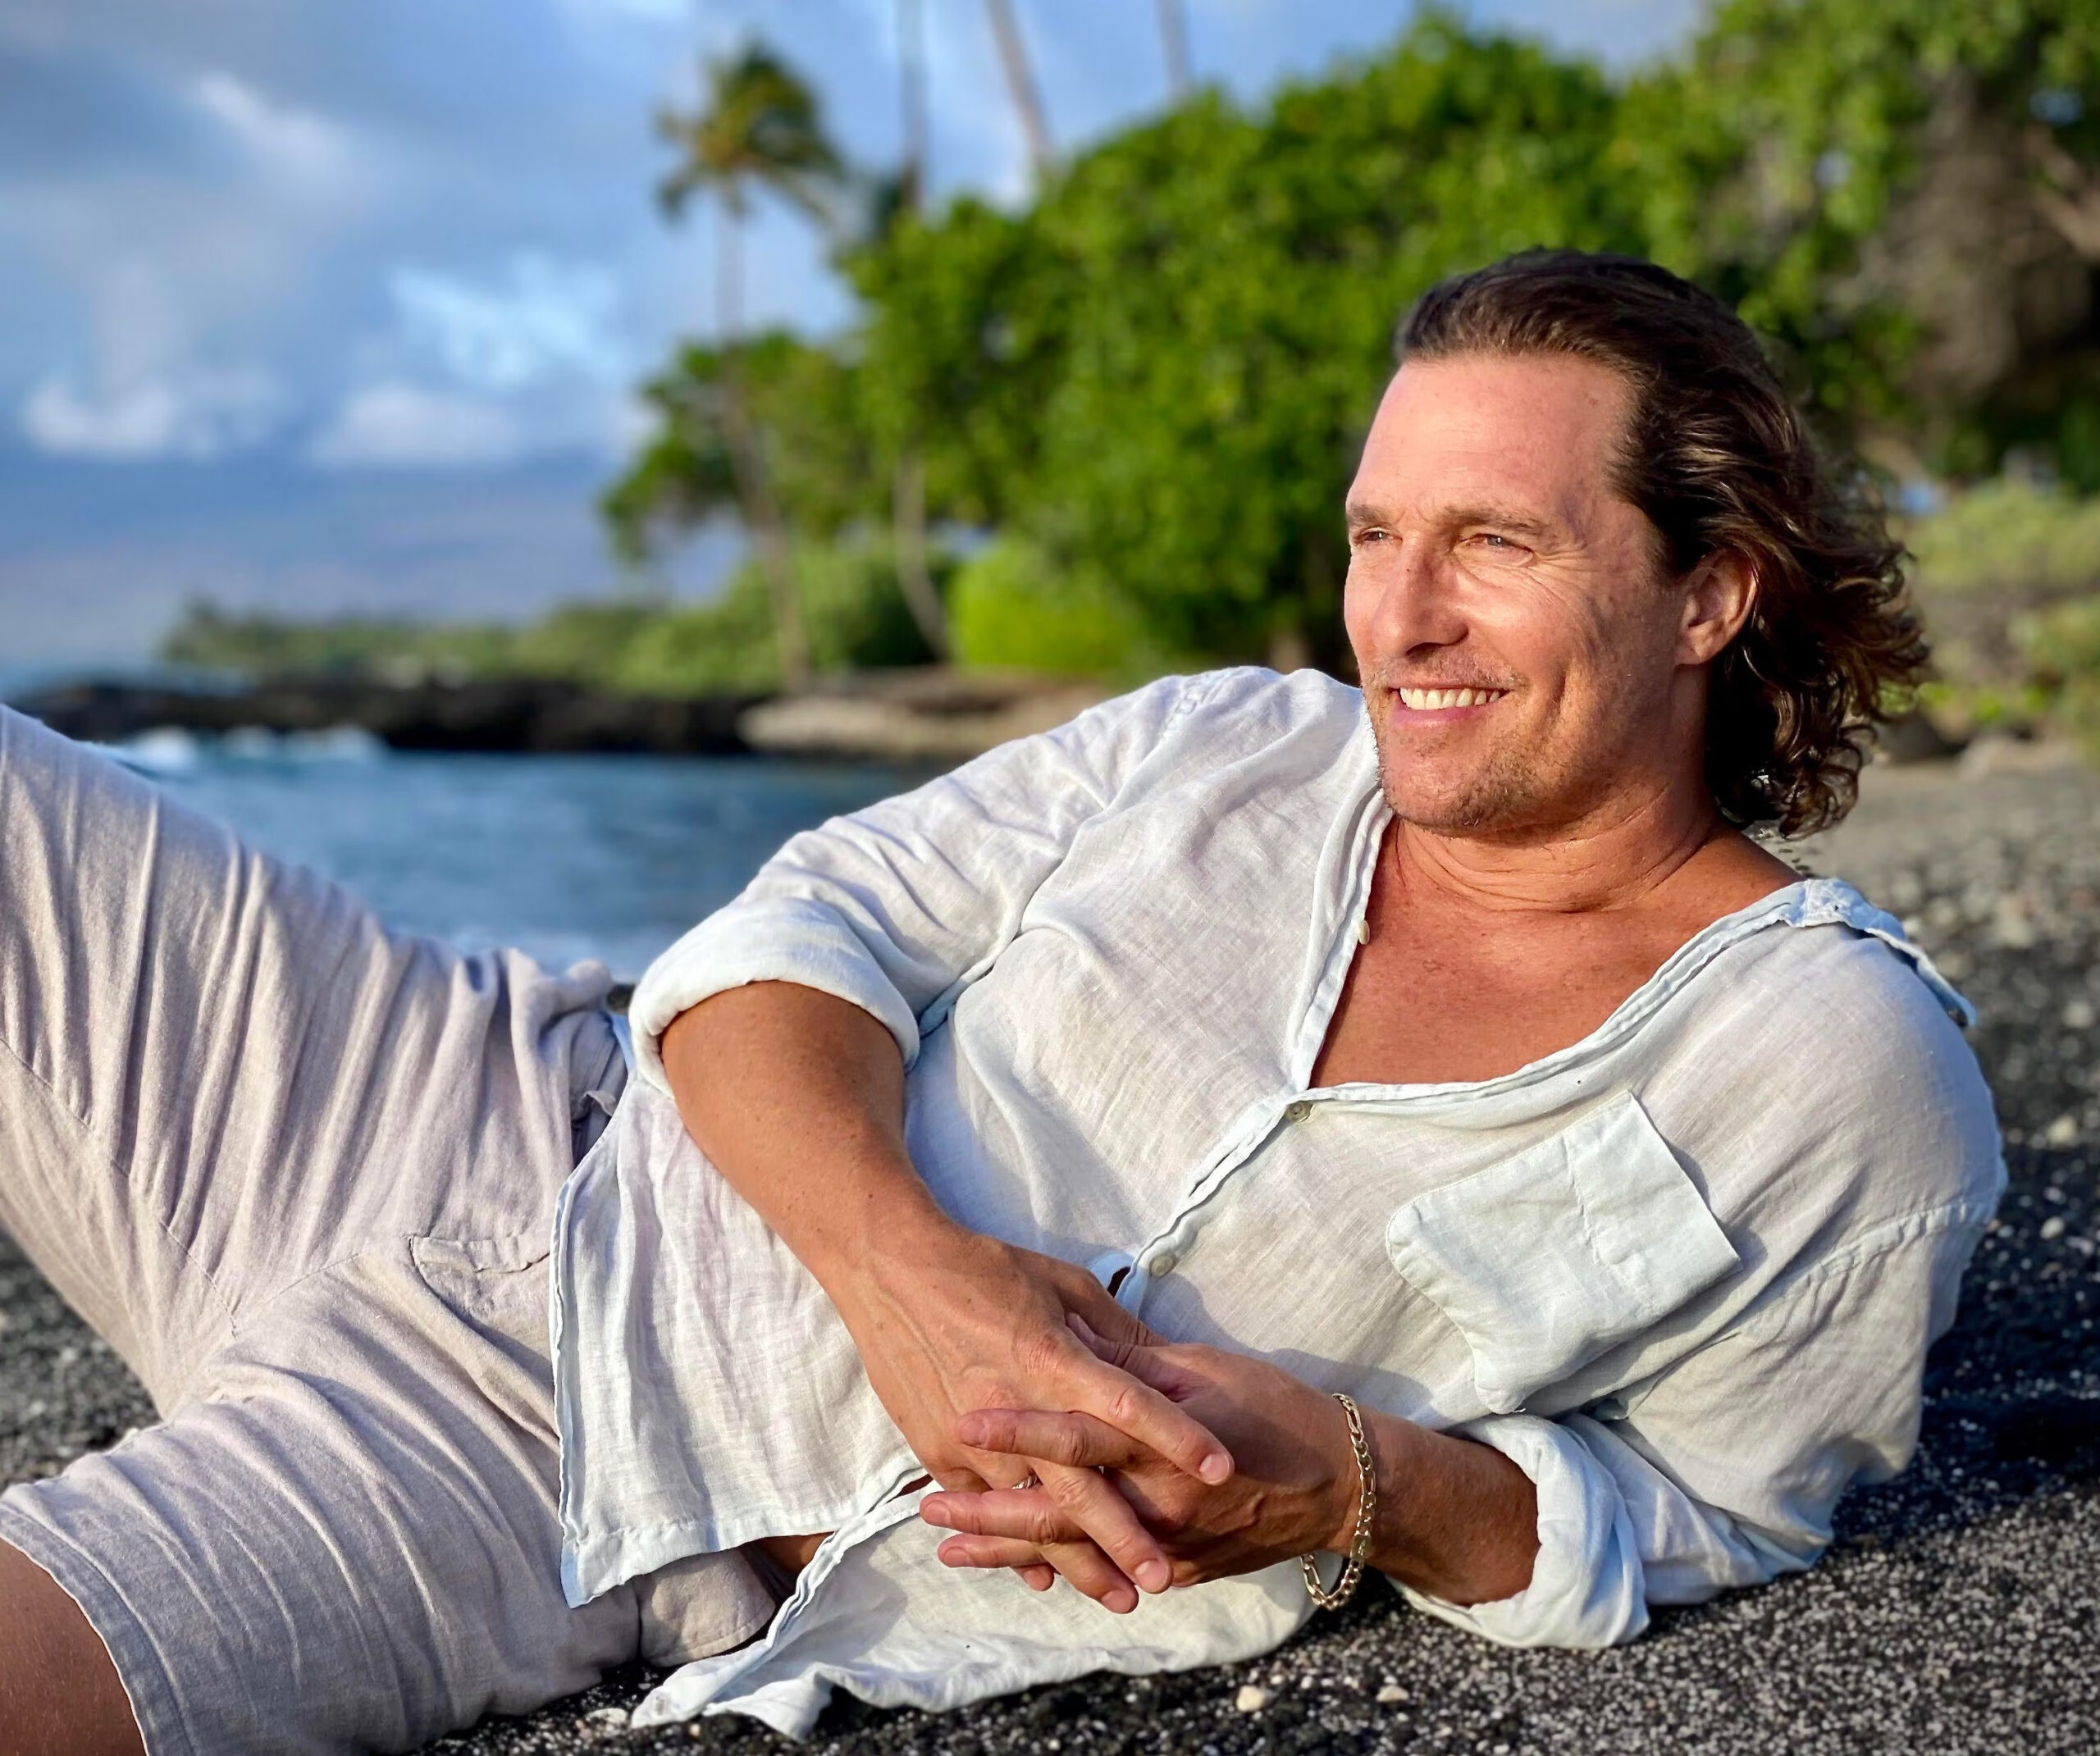 Insights from Matthew McConaughey on Cody Rhodes vs. Brock Lesnar and Seth Rollins’ dedication to working despite injury